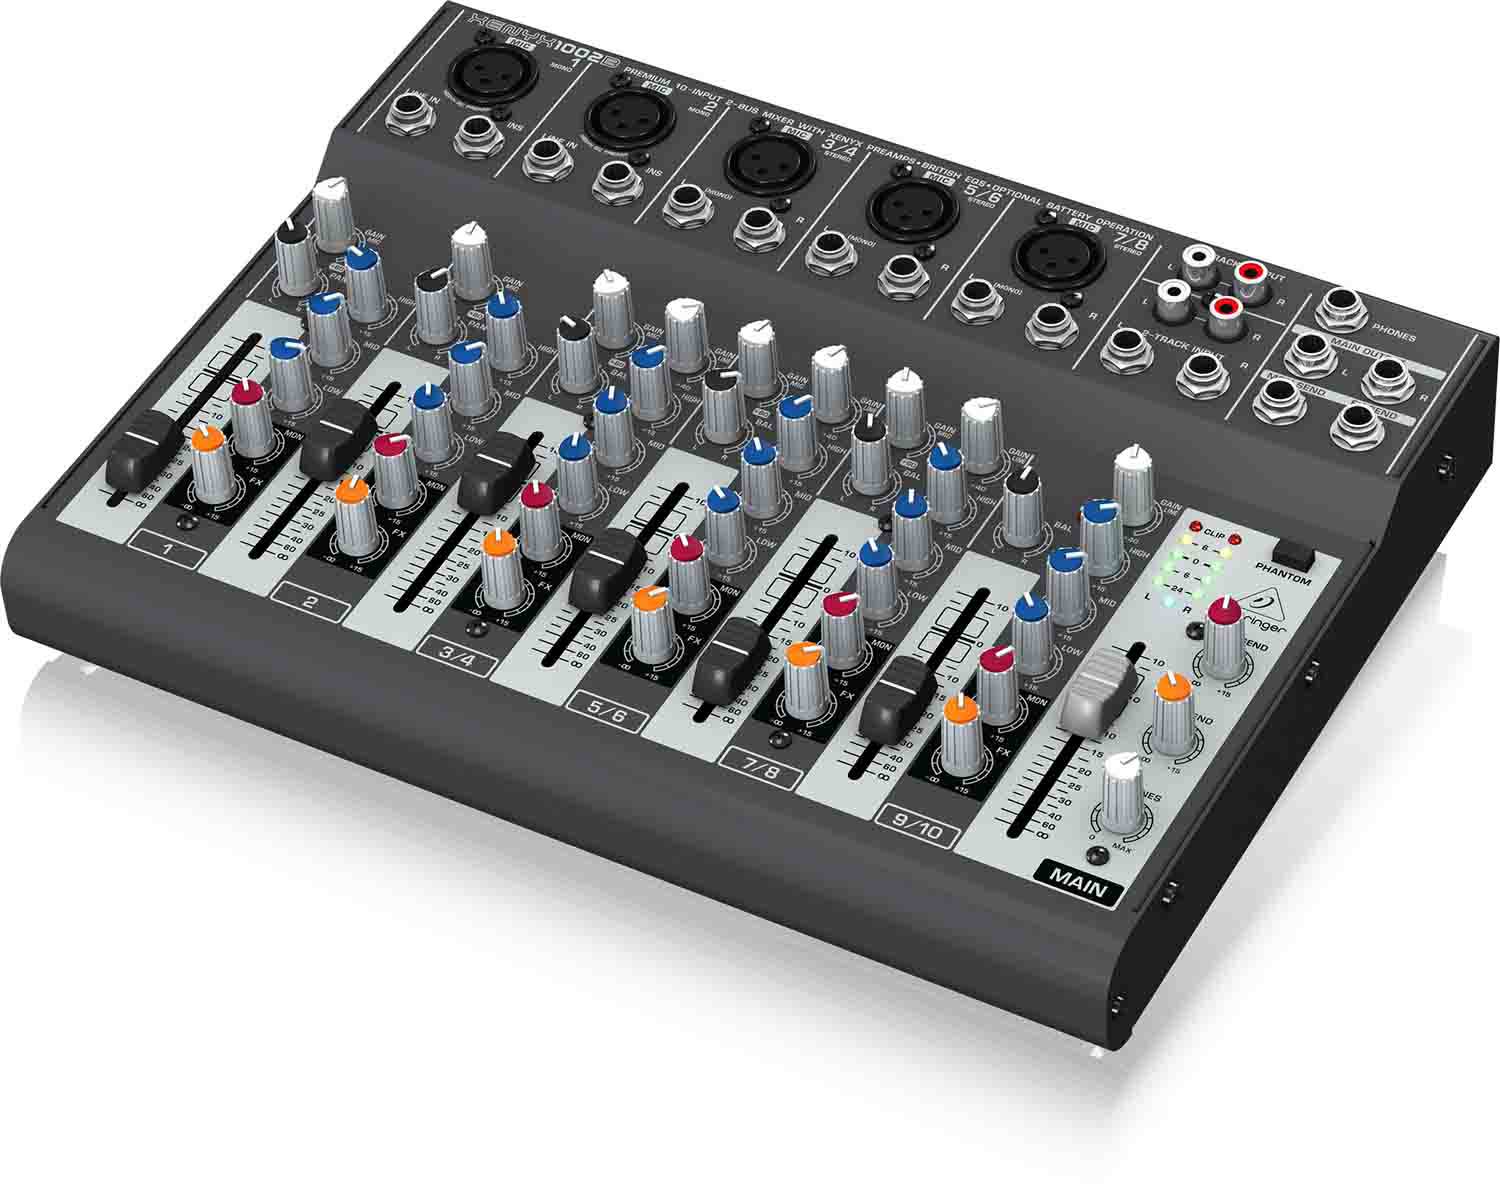 Behringer 1002B, 10-Input 2-Bus Mixer with XENYX Preamps - Hollywood DJ